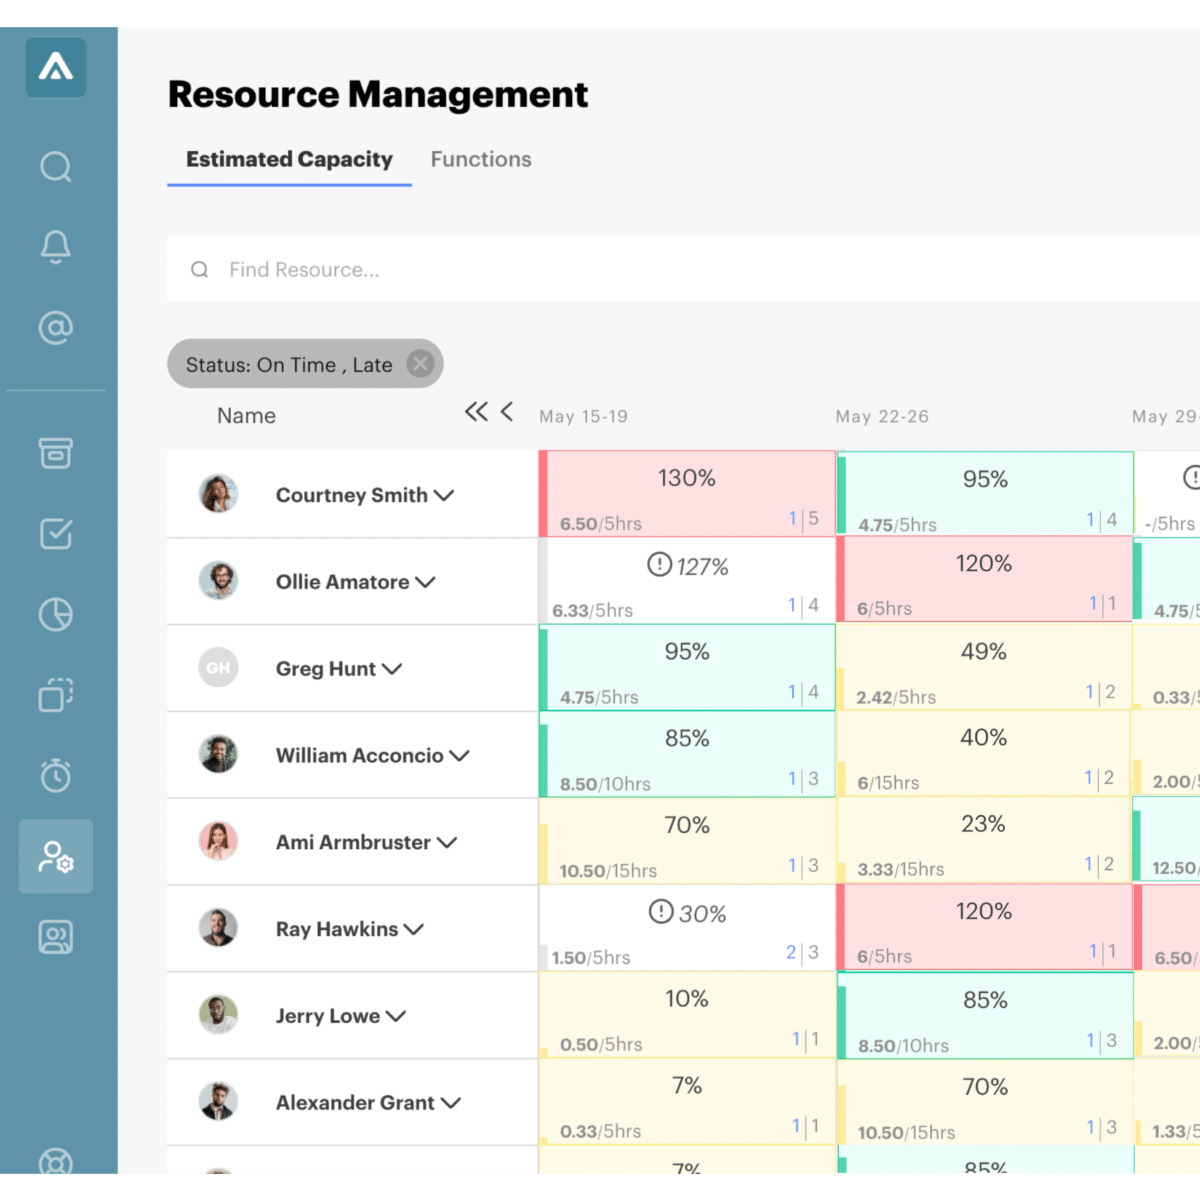 resource management capacity view in GUIDEcx onboarding platform. Shows each persons name and their capacity by week